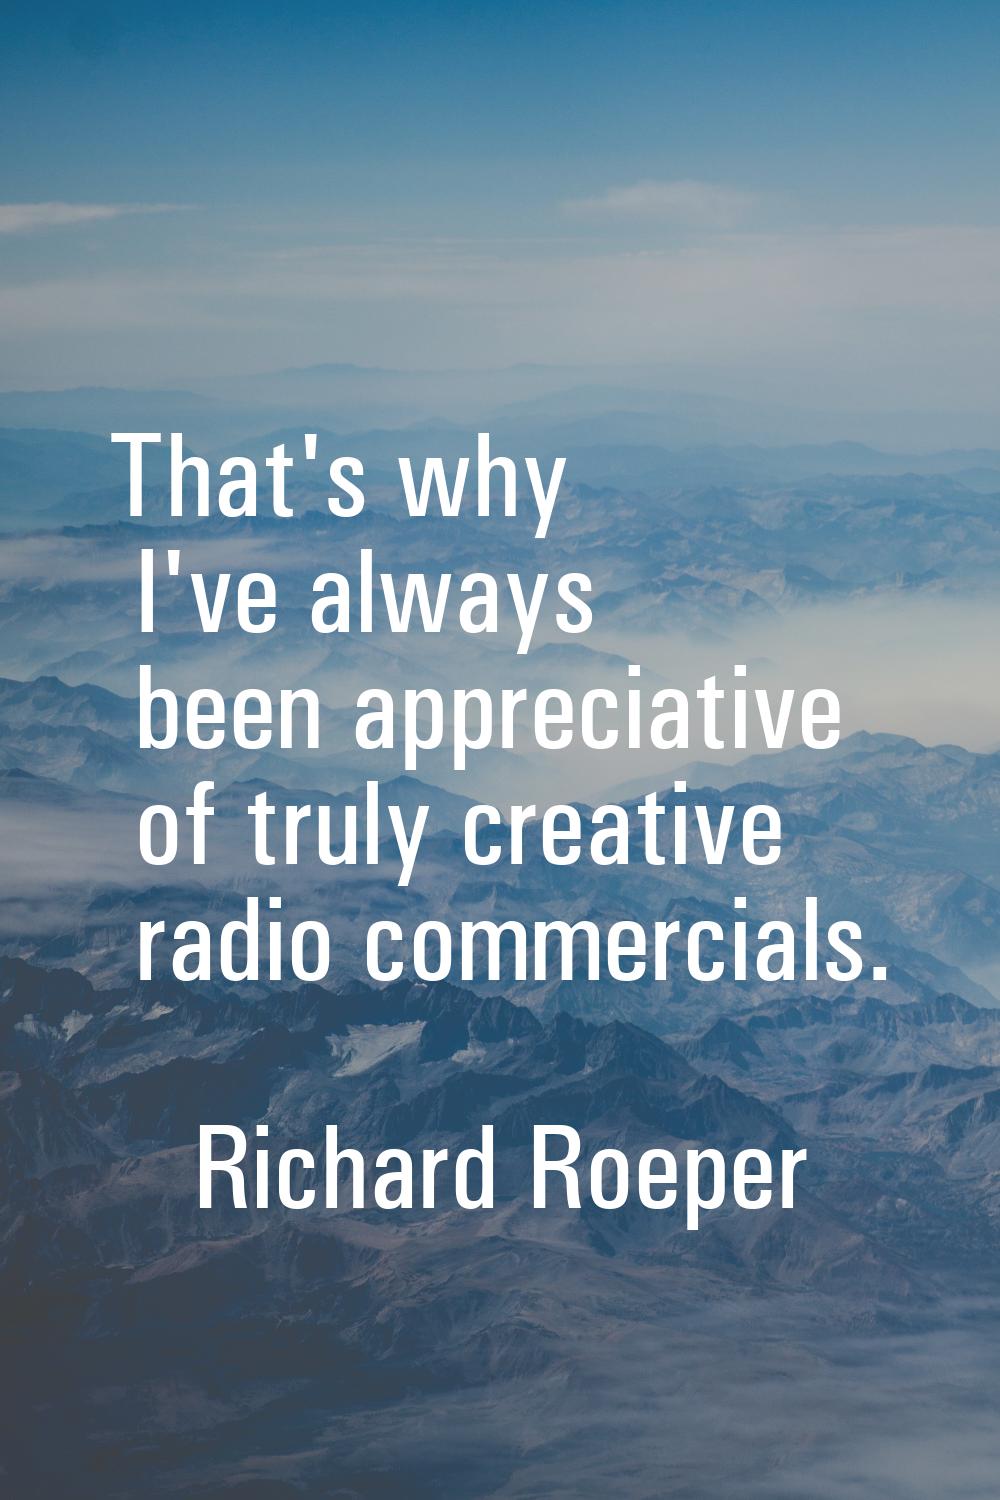 That's why I've always been appreciative of truly creative radio commercials.